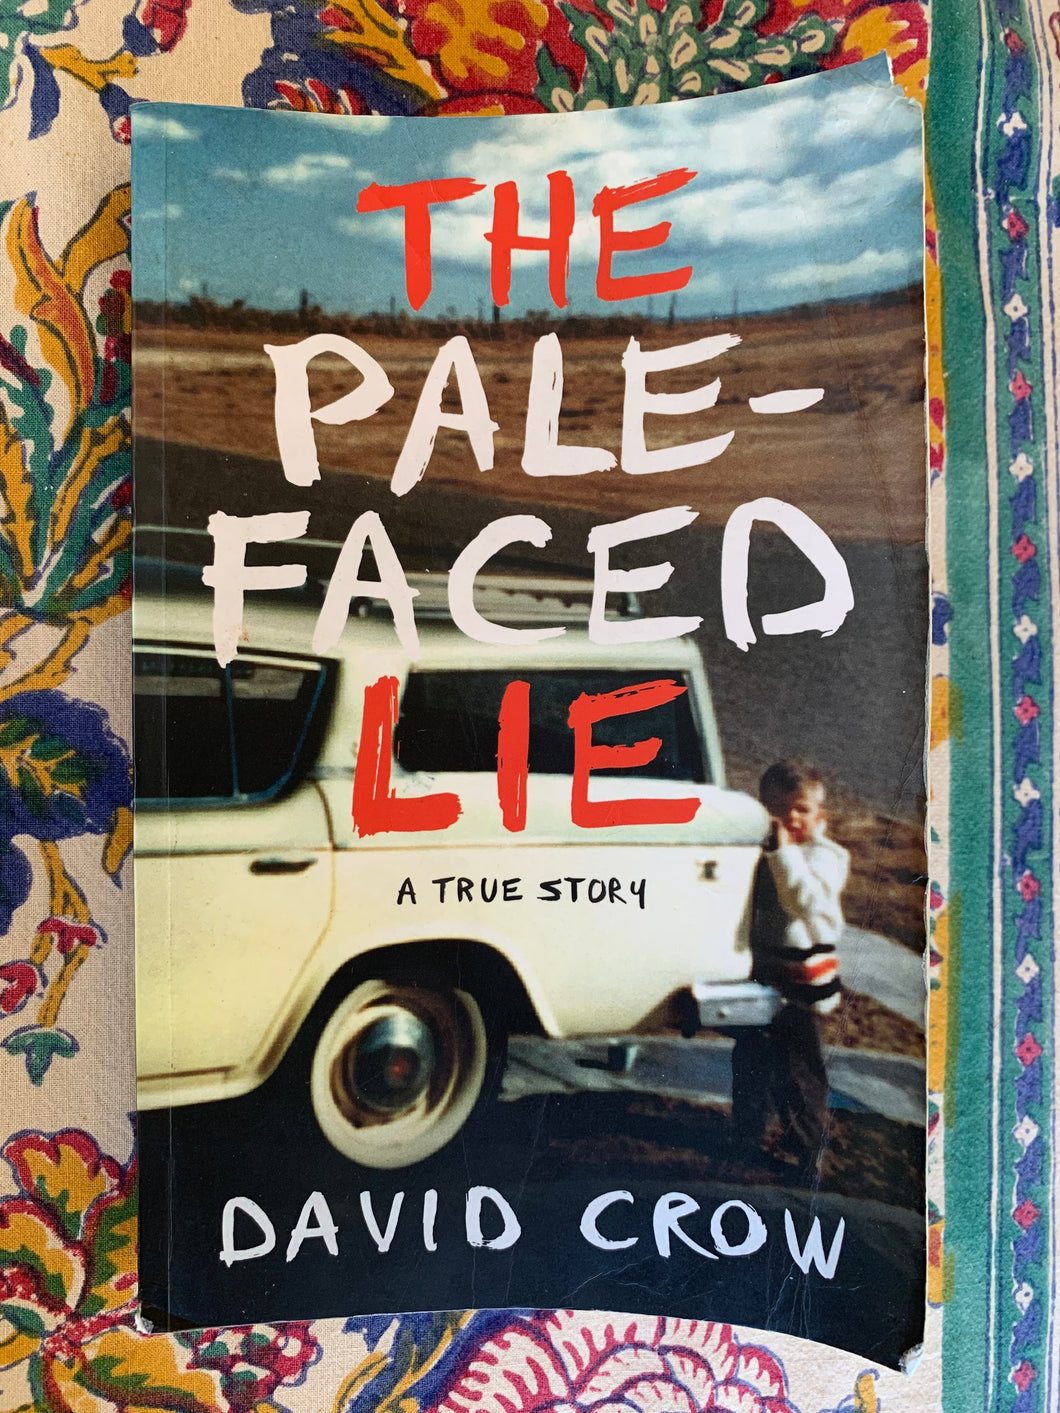 The Pale-Faced Lie: A True Story